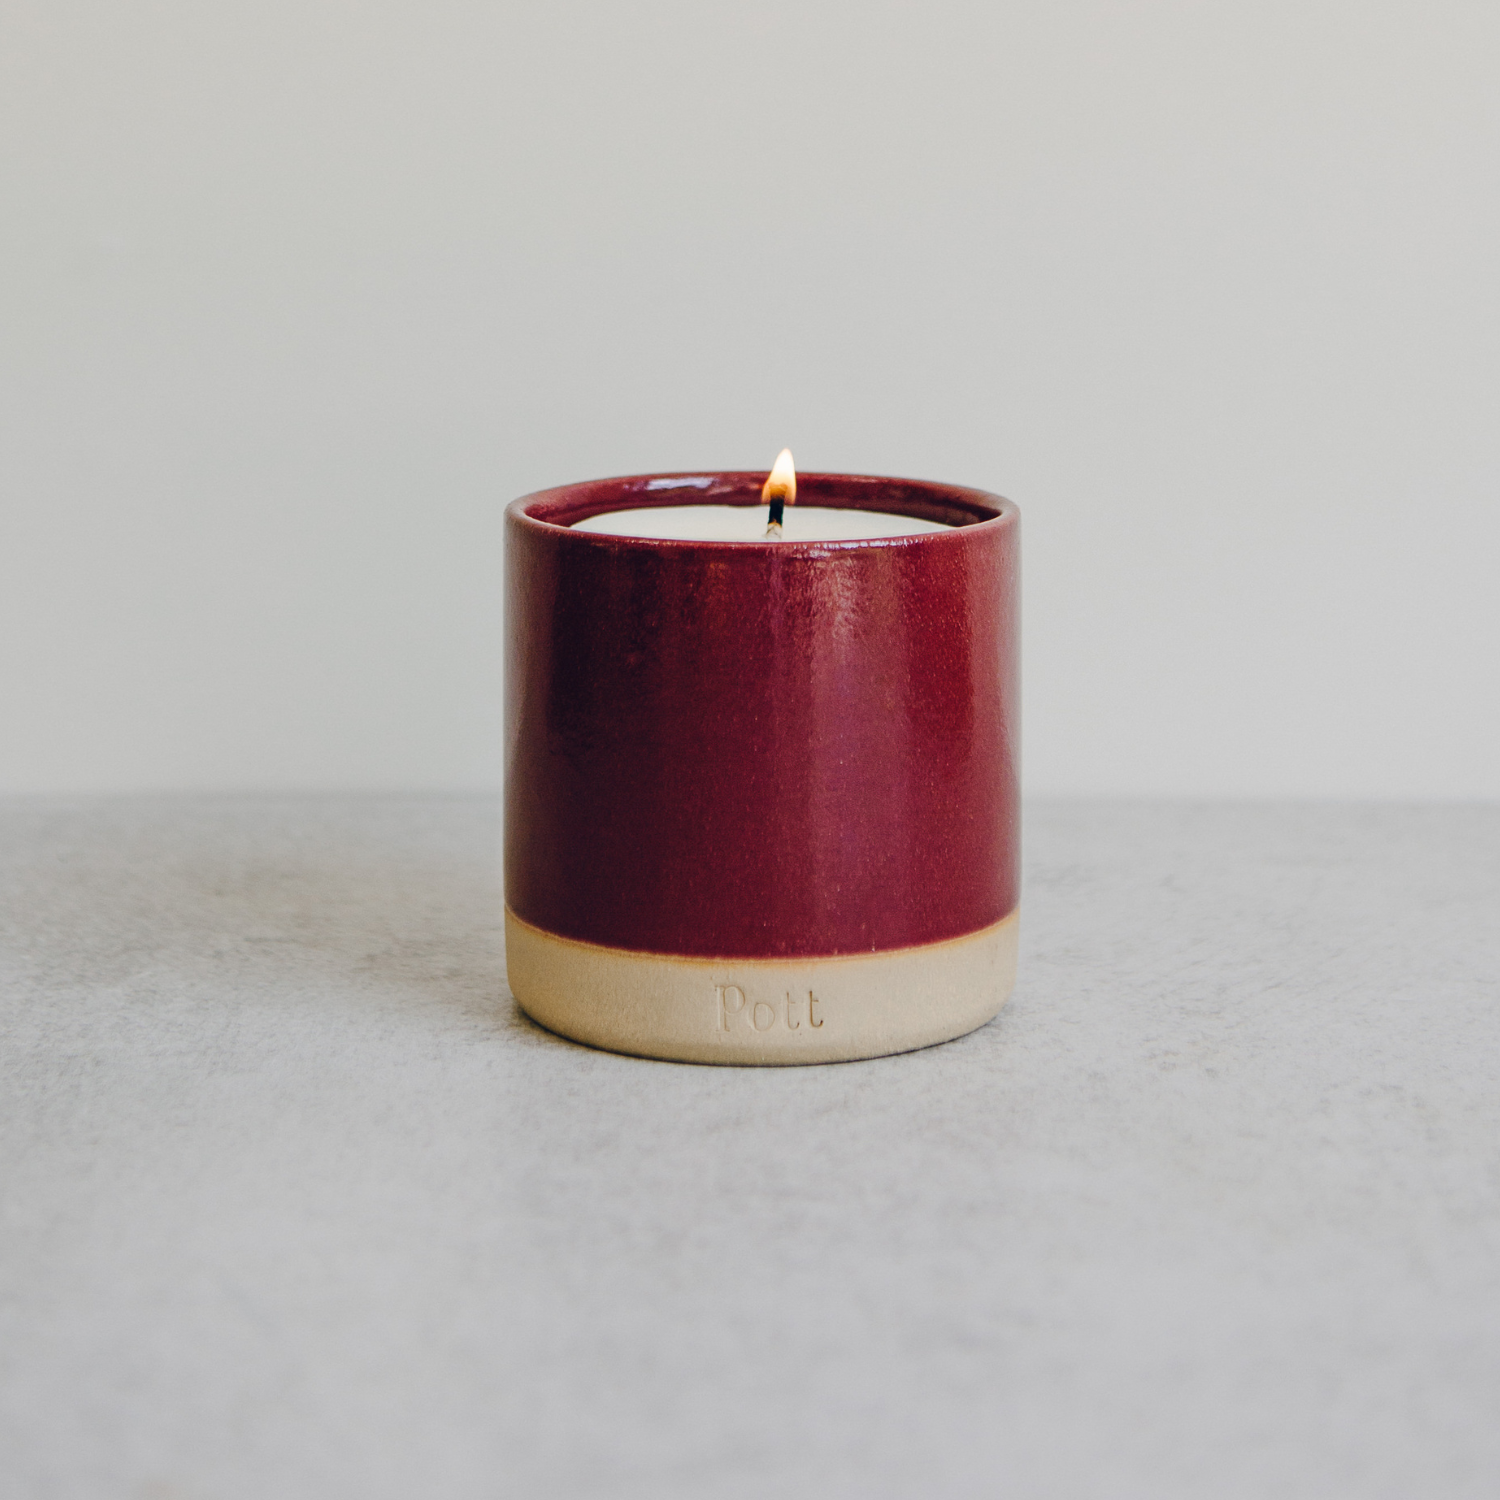 The Ruby Standard Candle